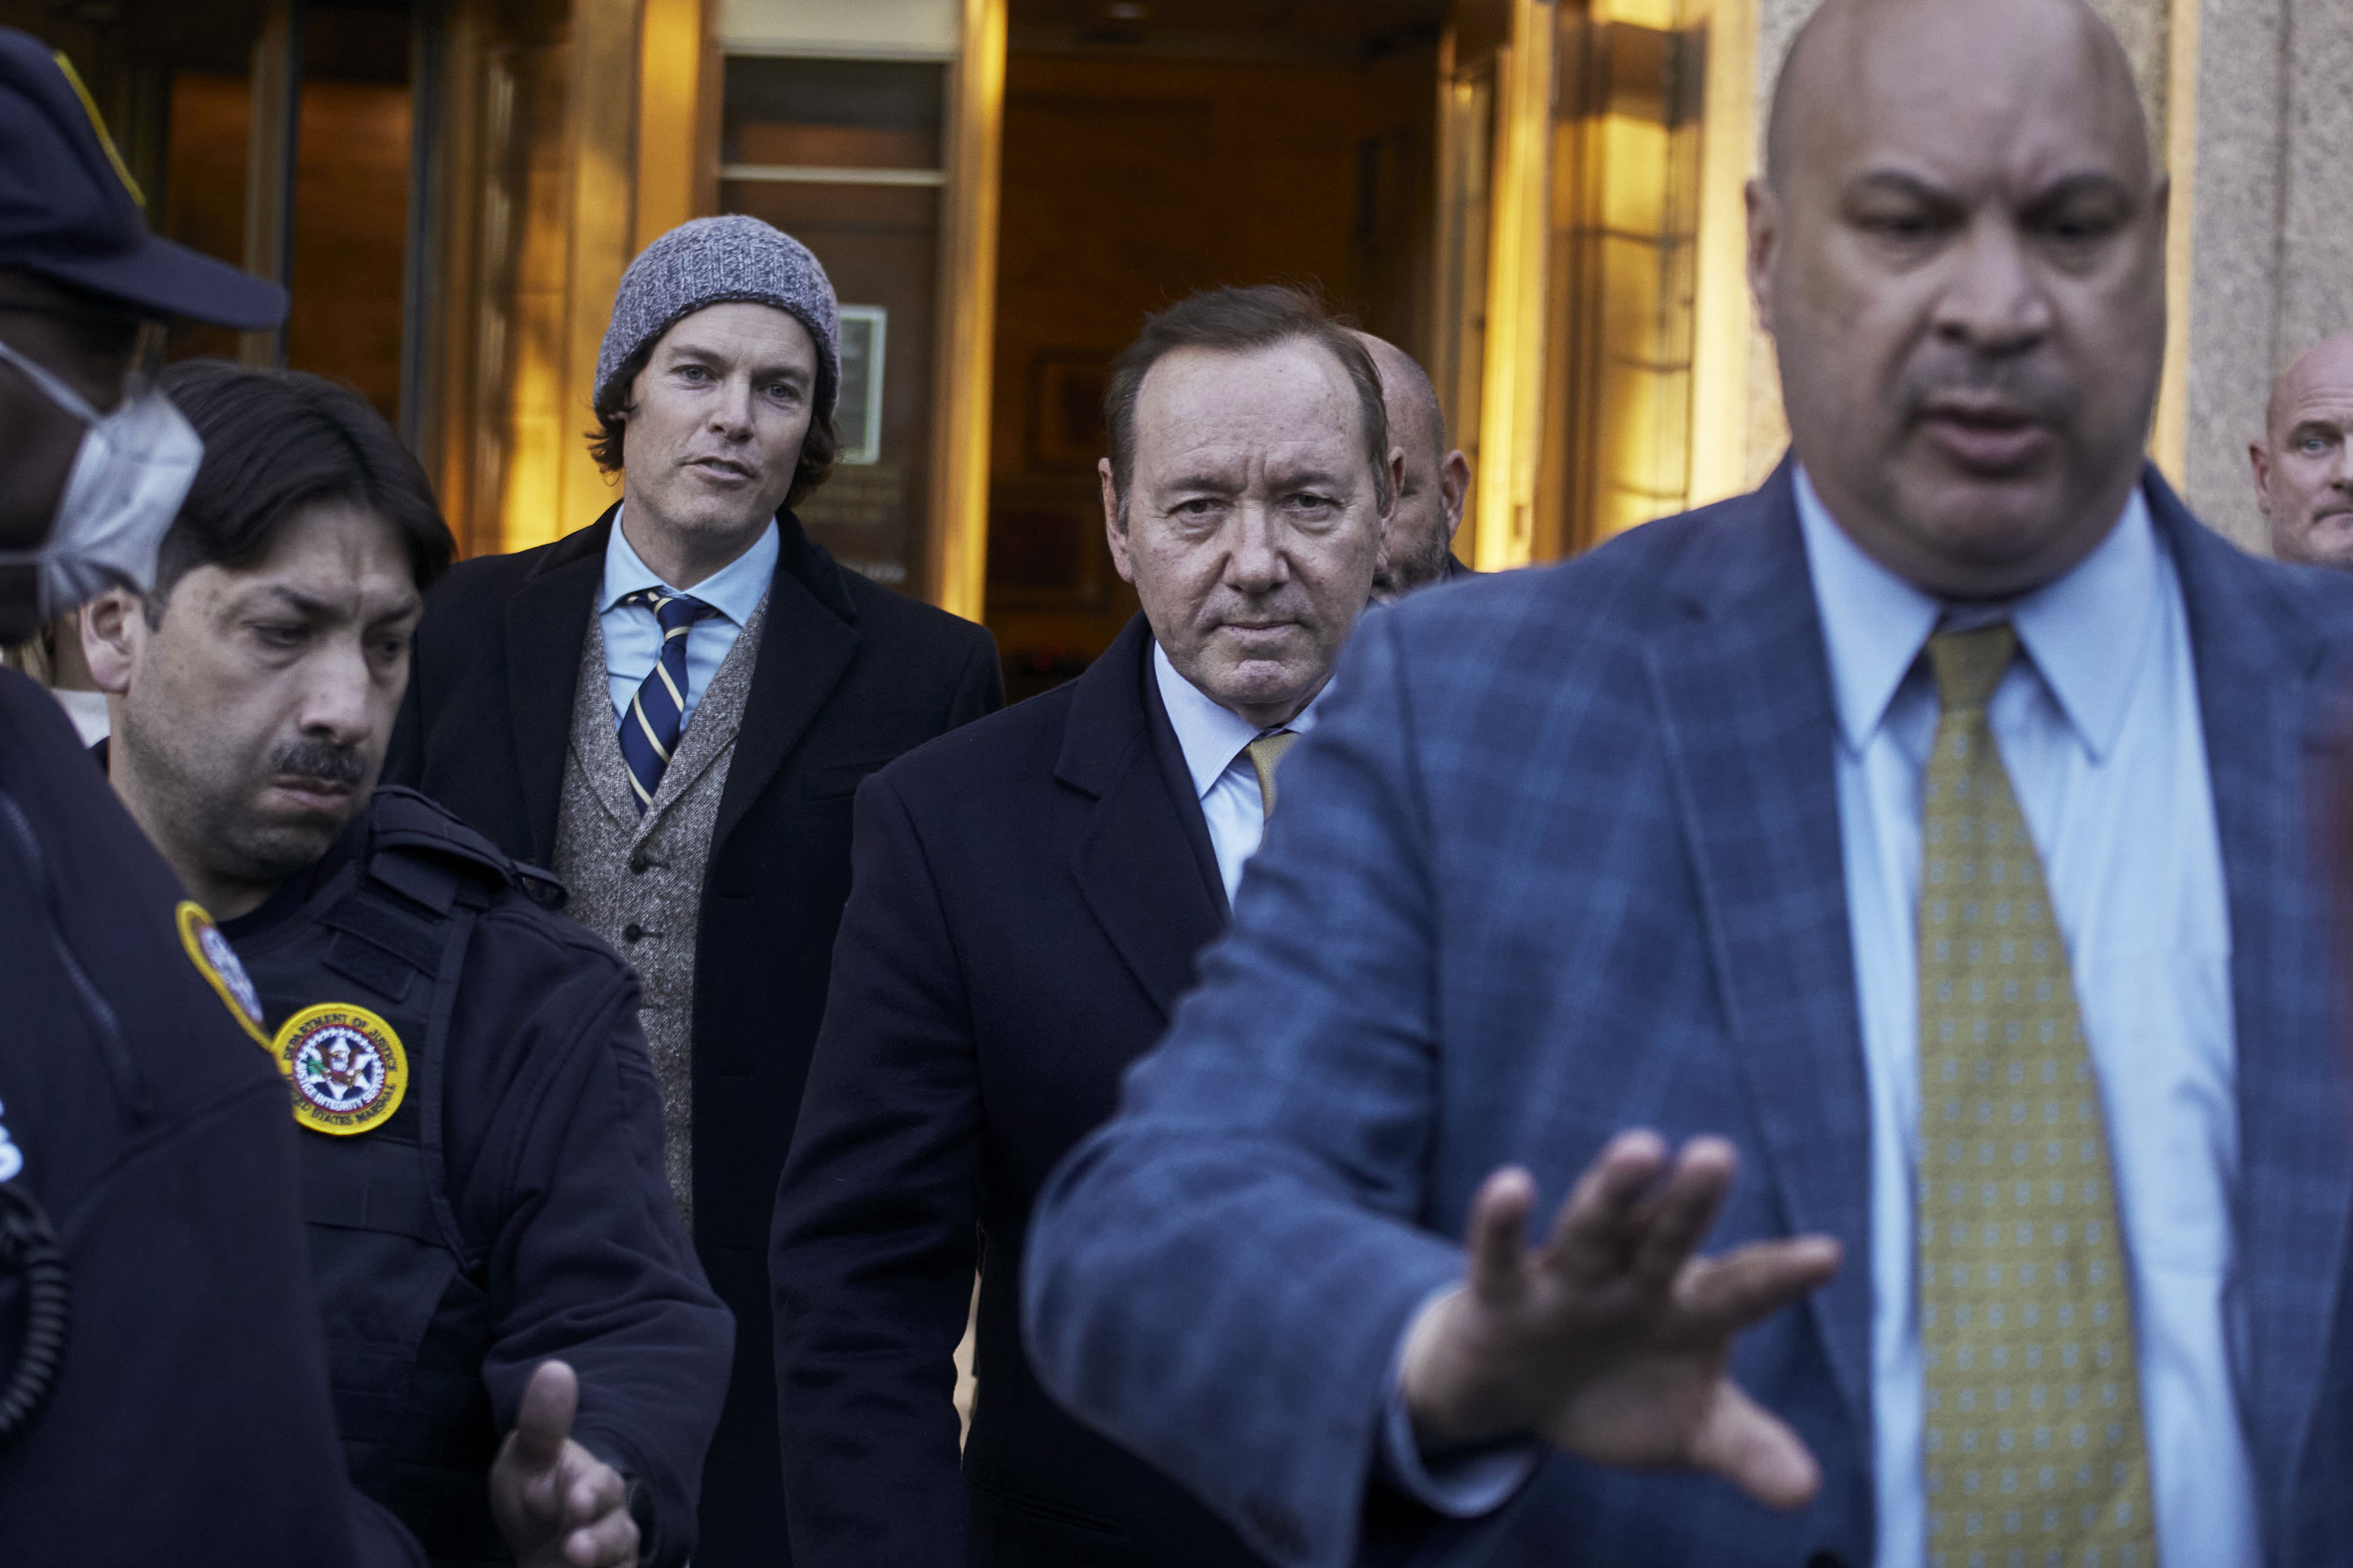 A jury ruled that Kevin Spacey did not abuse actor Anthony Rapp in 1986 (AP Photo/Andres Kudacki)